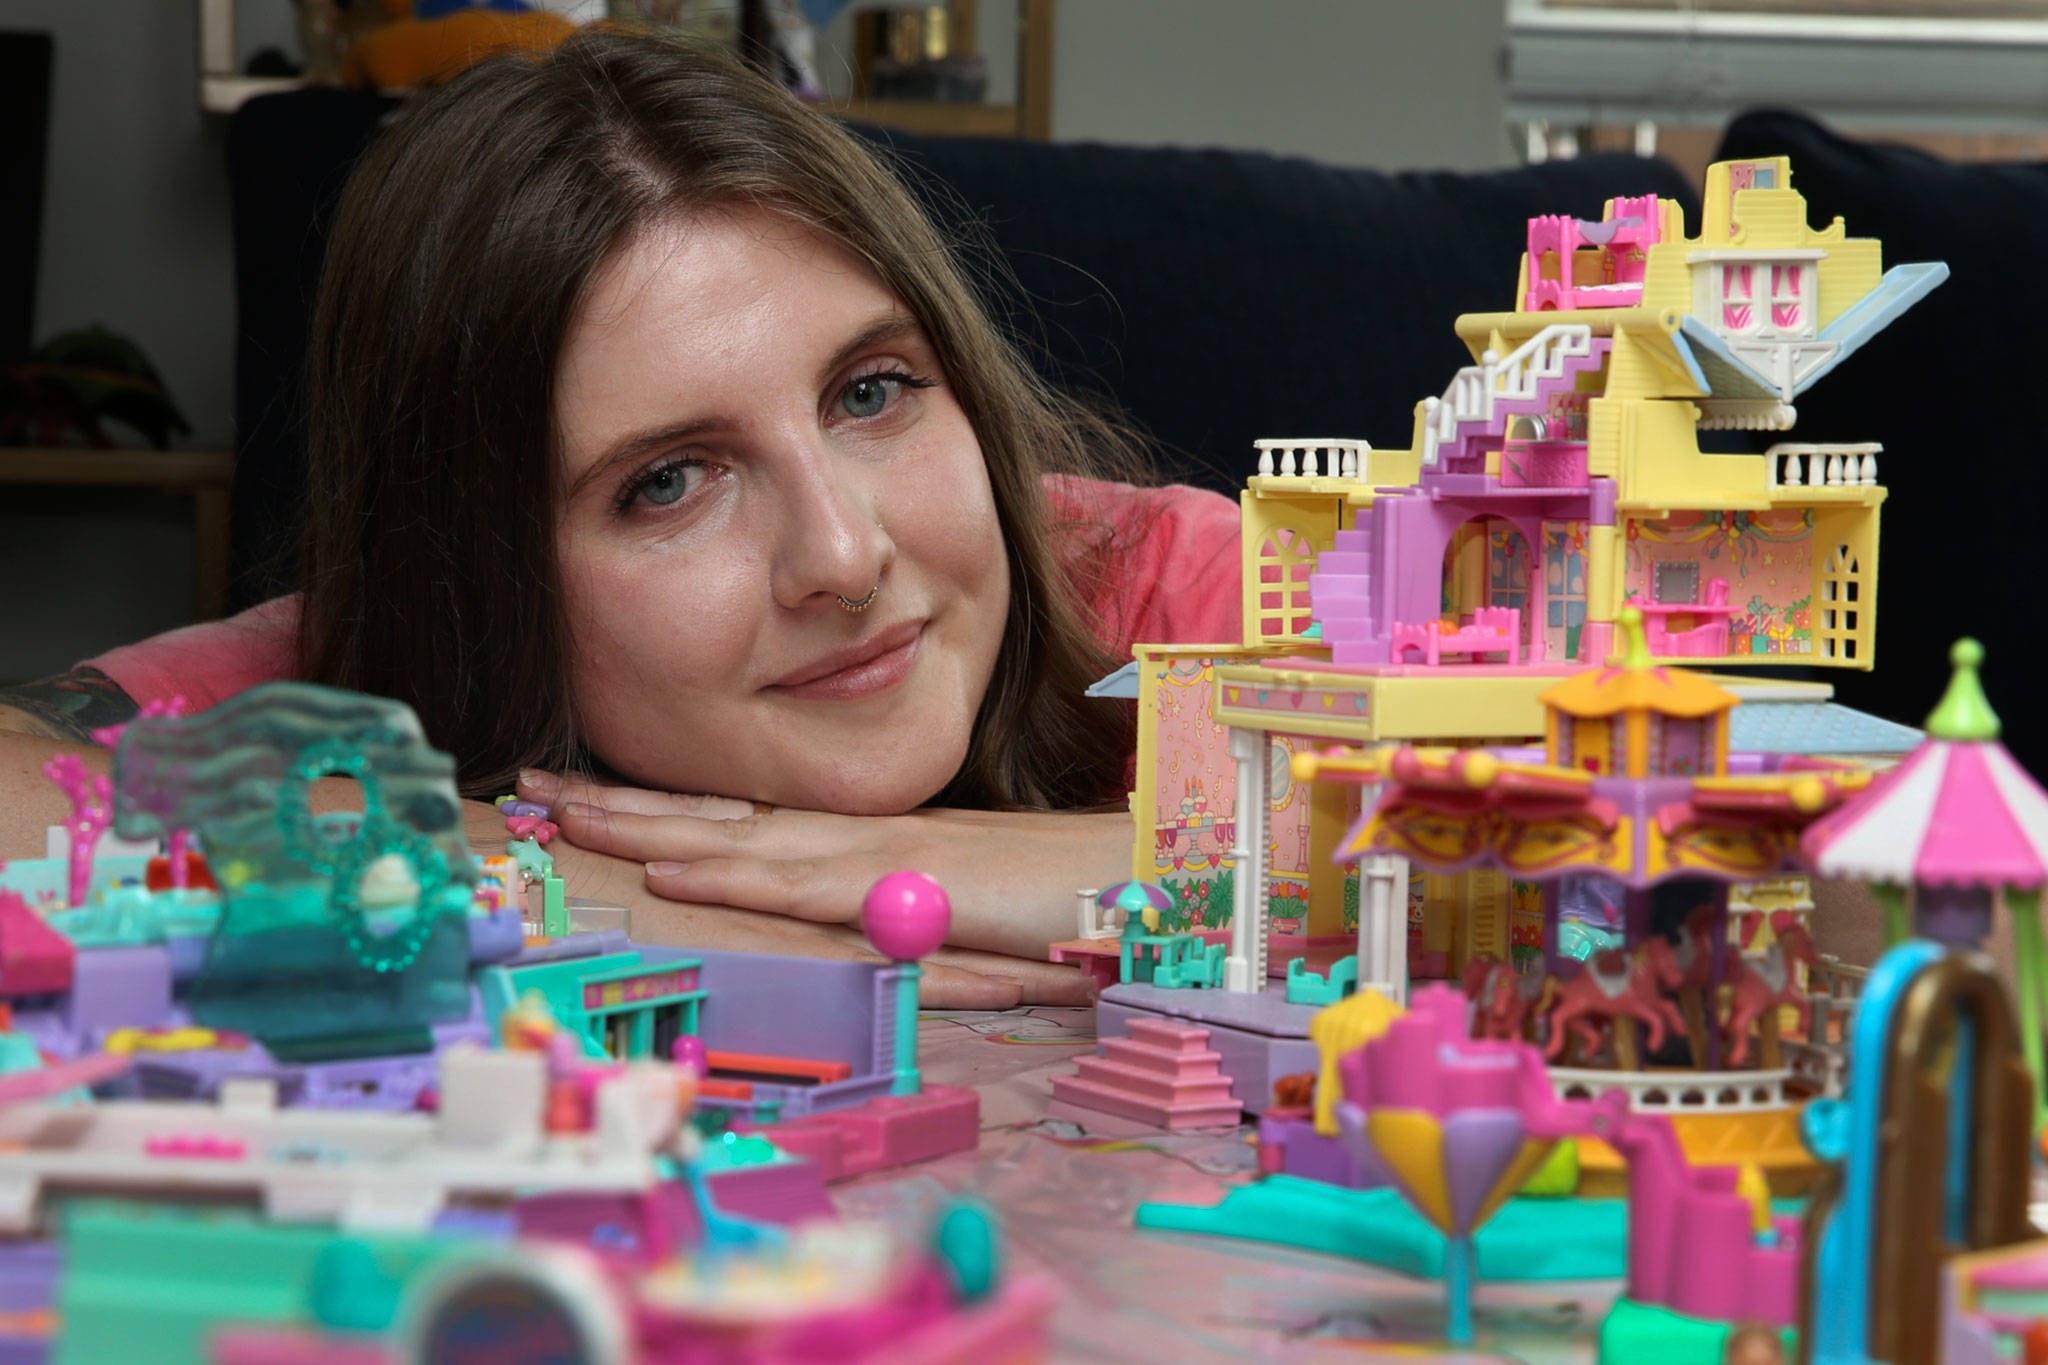 Tiny dolls are a huge obsession for Lake Stevens woman